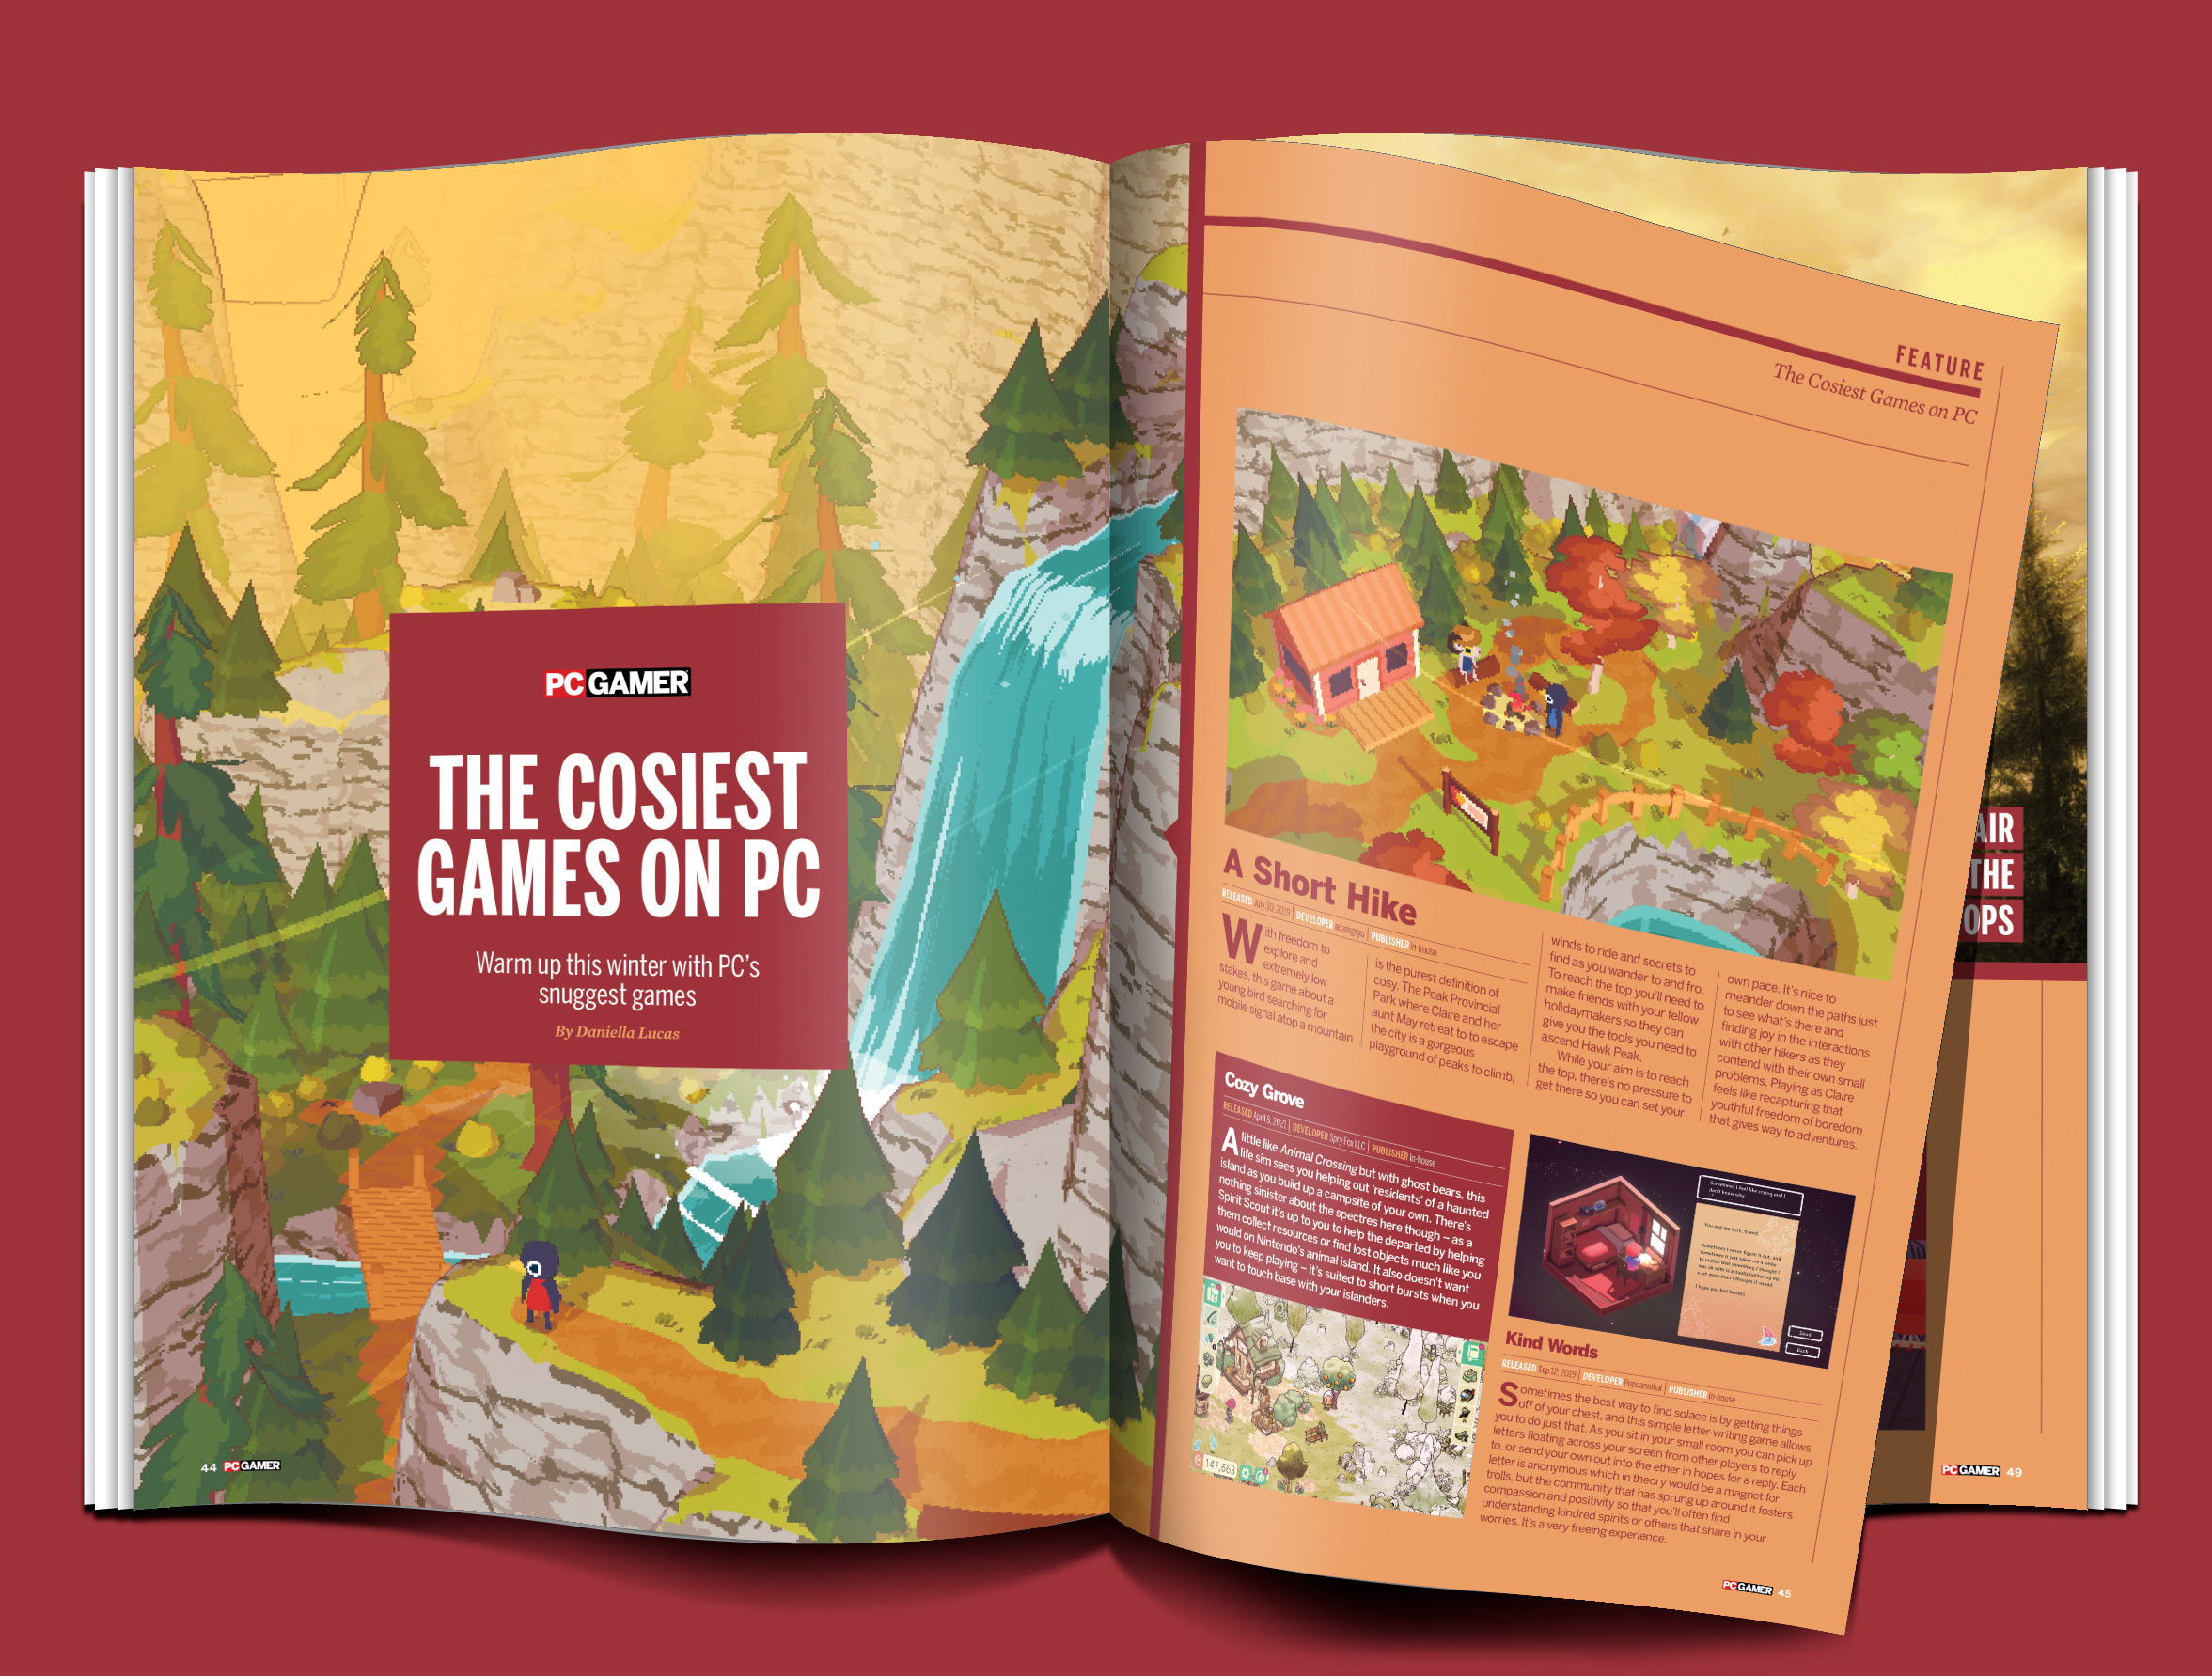 PC Gamer magazine issue 380 The Cosiest Games on PC spread